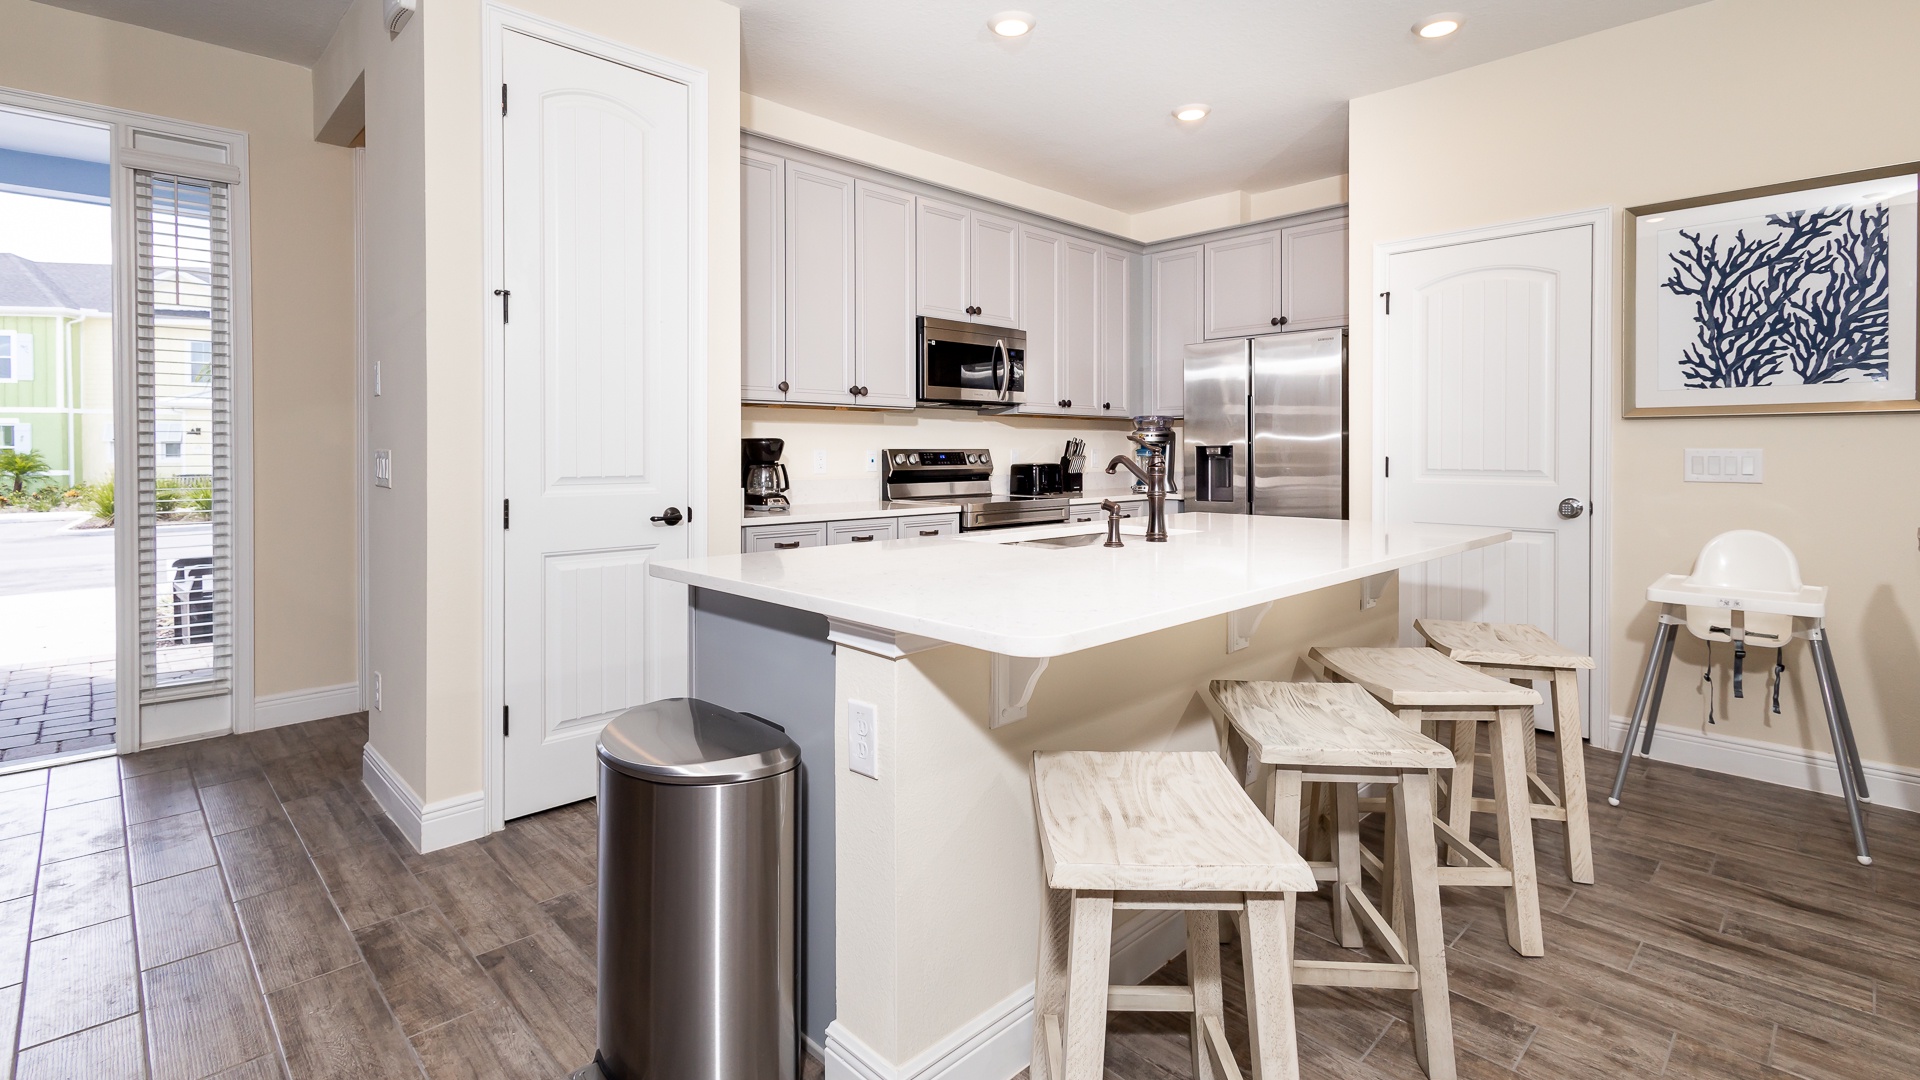 Sip morning coffee or enjoy a snack at the kitchen counter, with seating for 4